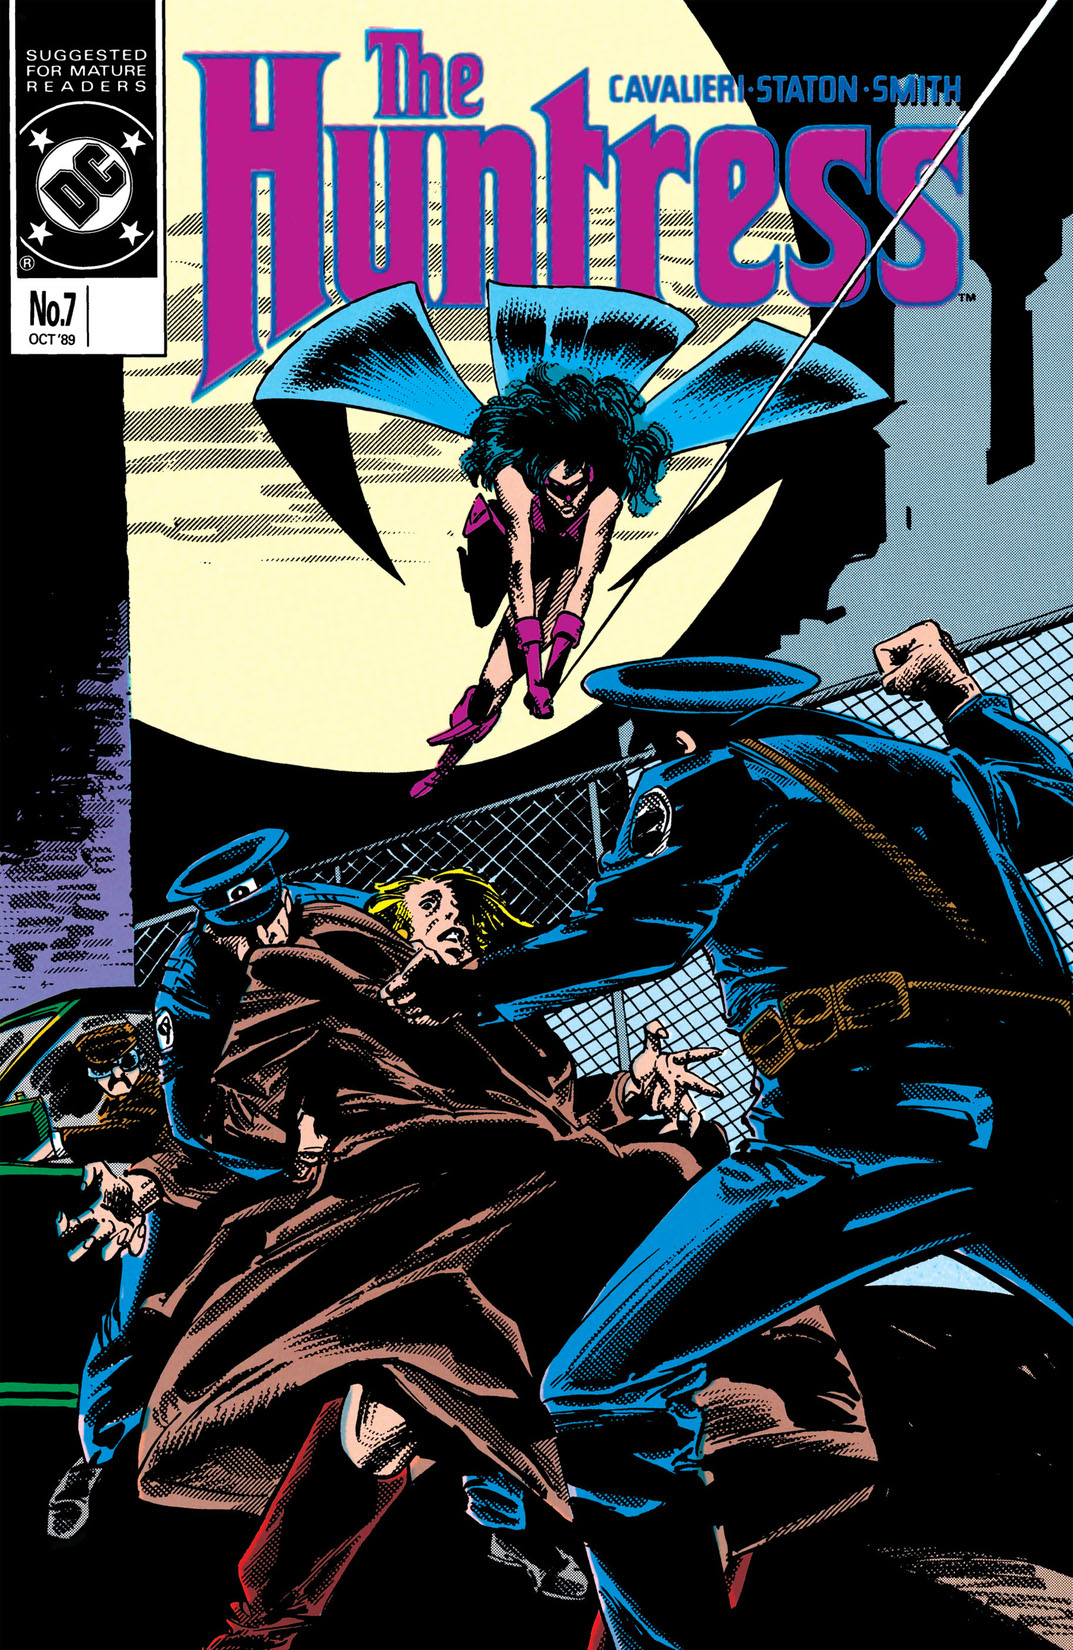 The Huntress (1989-1990) #7 preview images